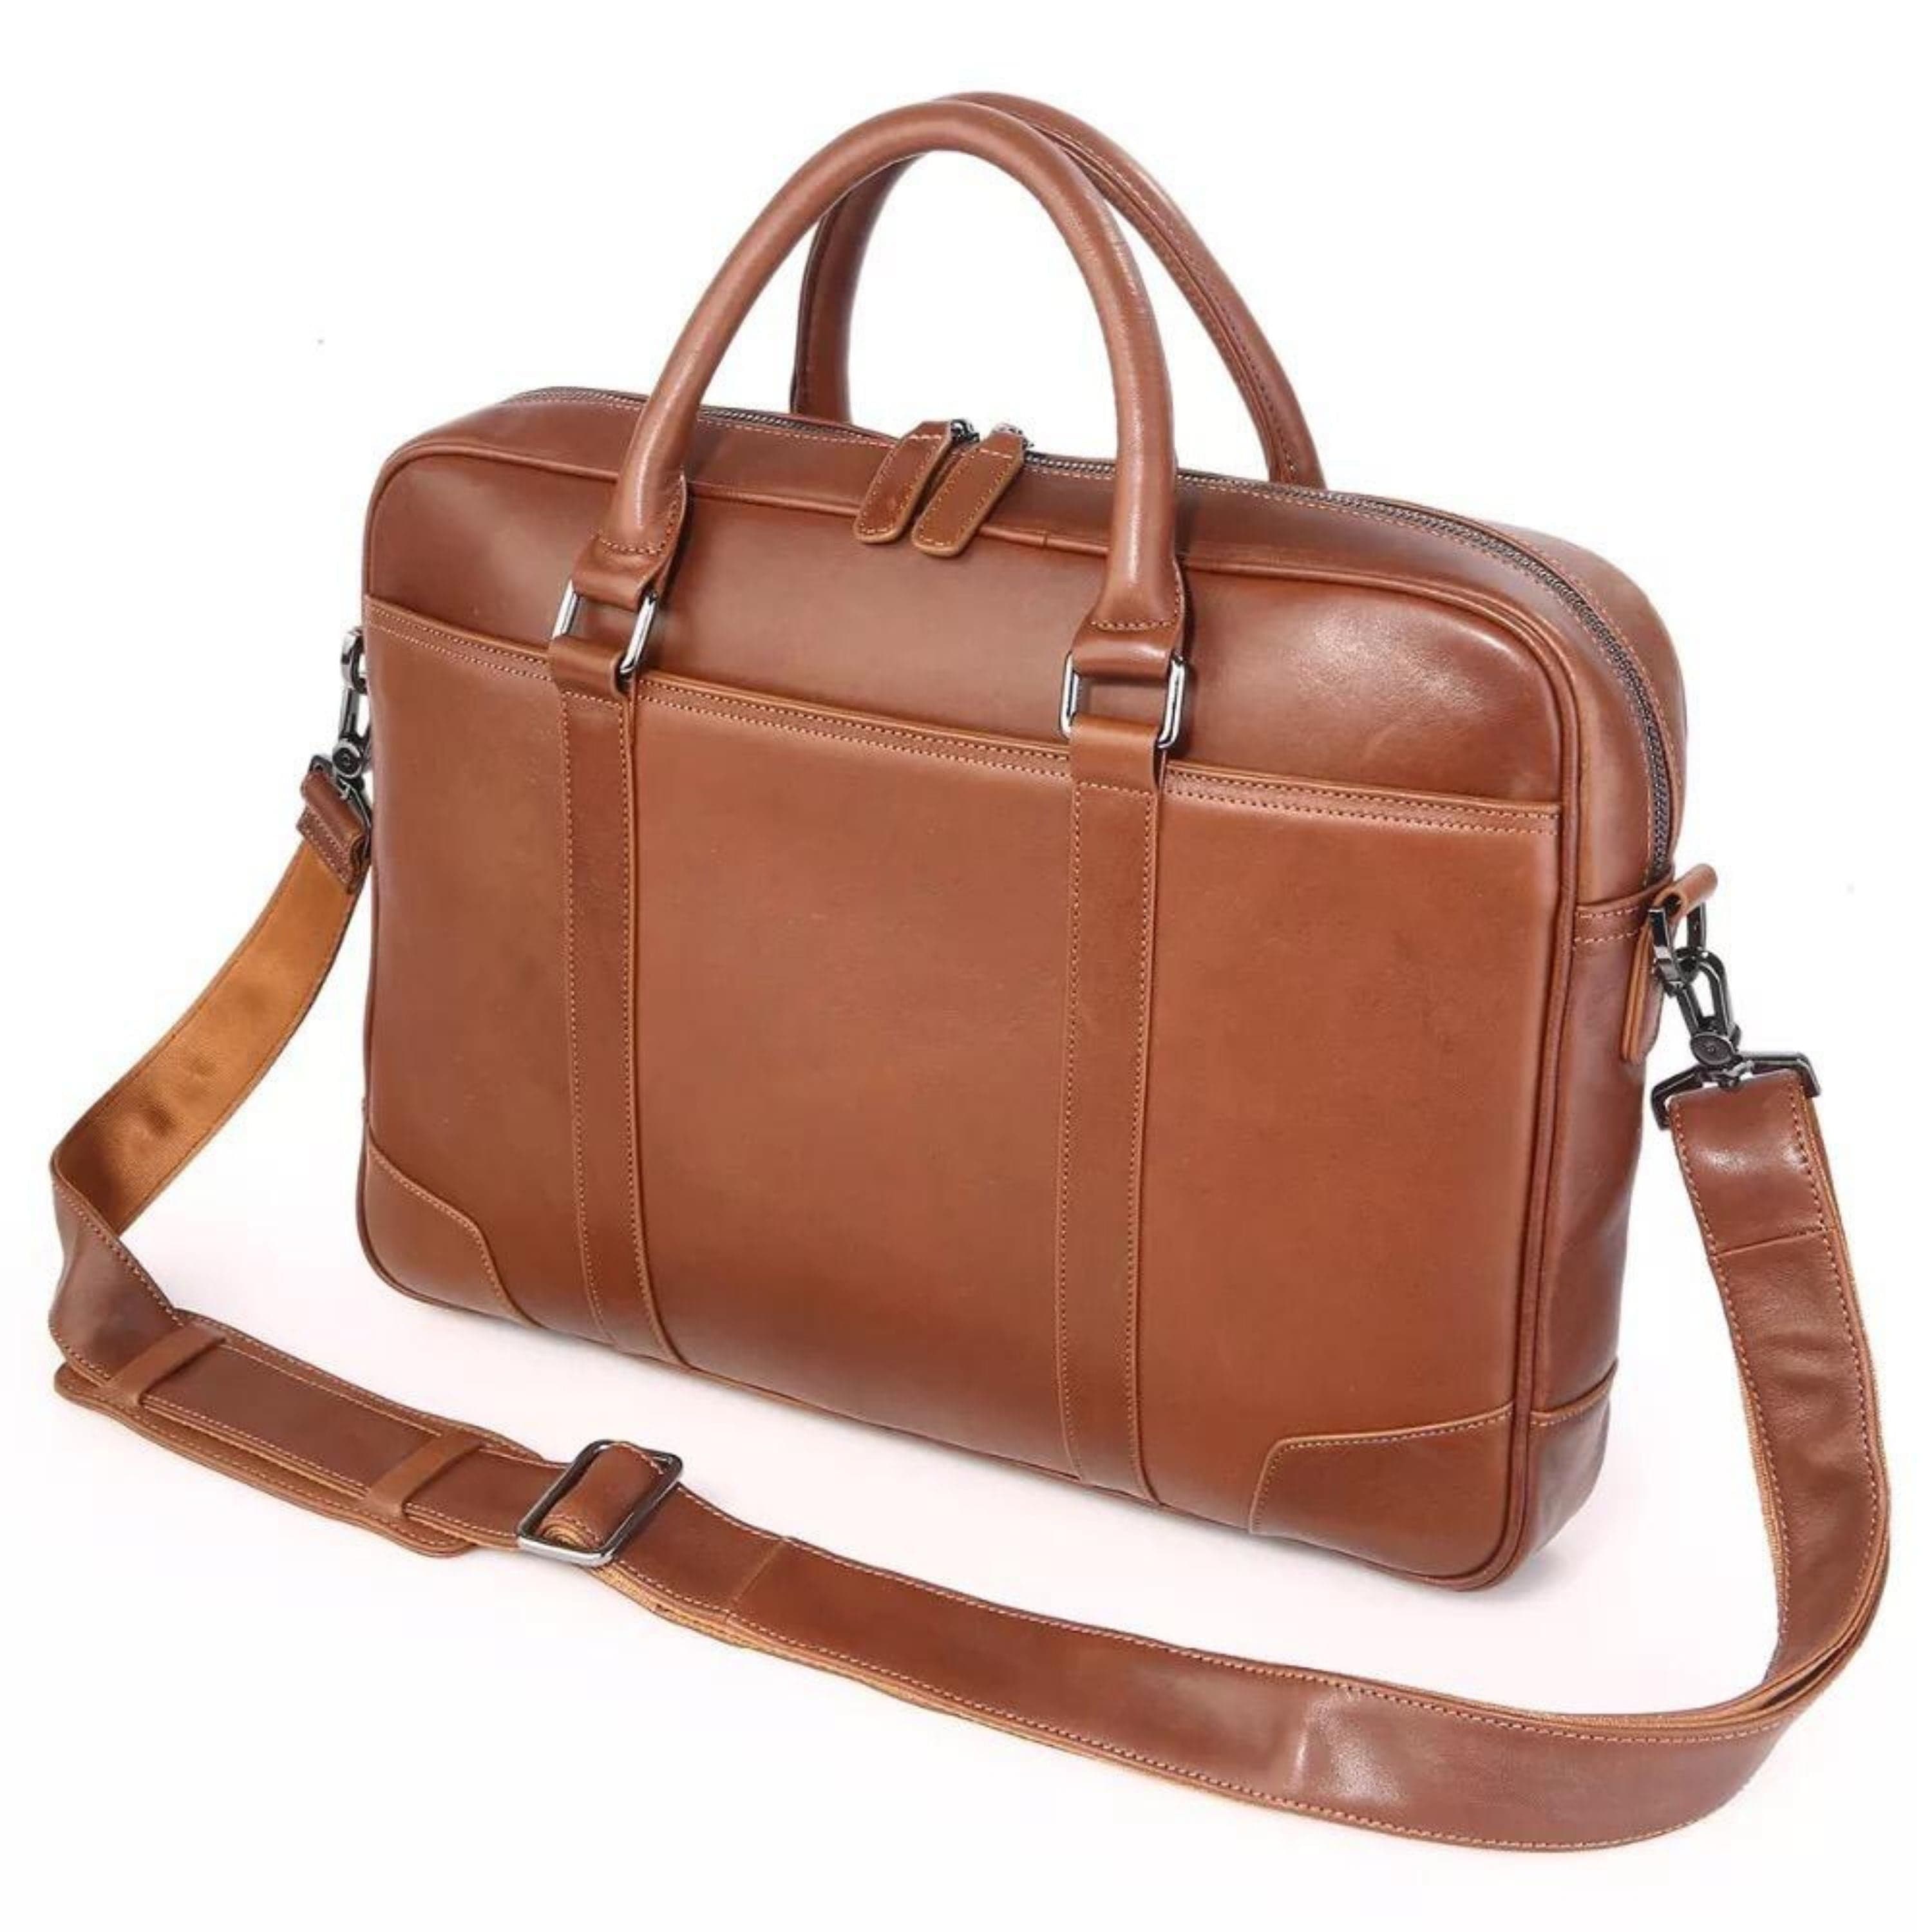 kinnoti LAPTOP BAGS Genuine Leather Laptop Bag For Mac book Pro 13- 14 Inches